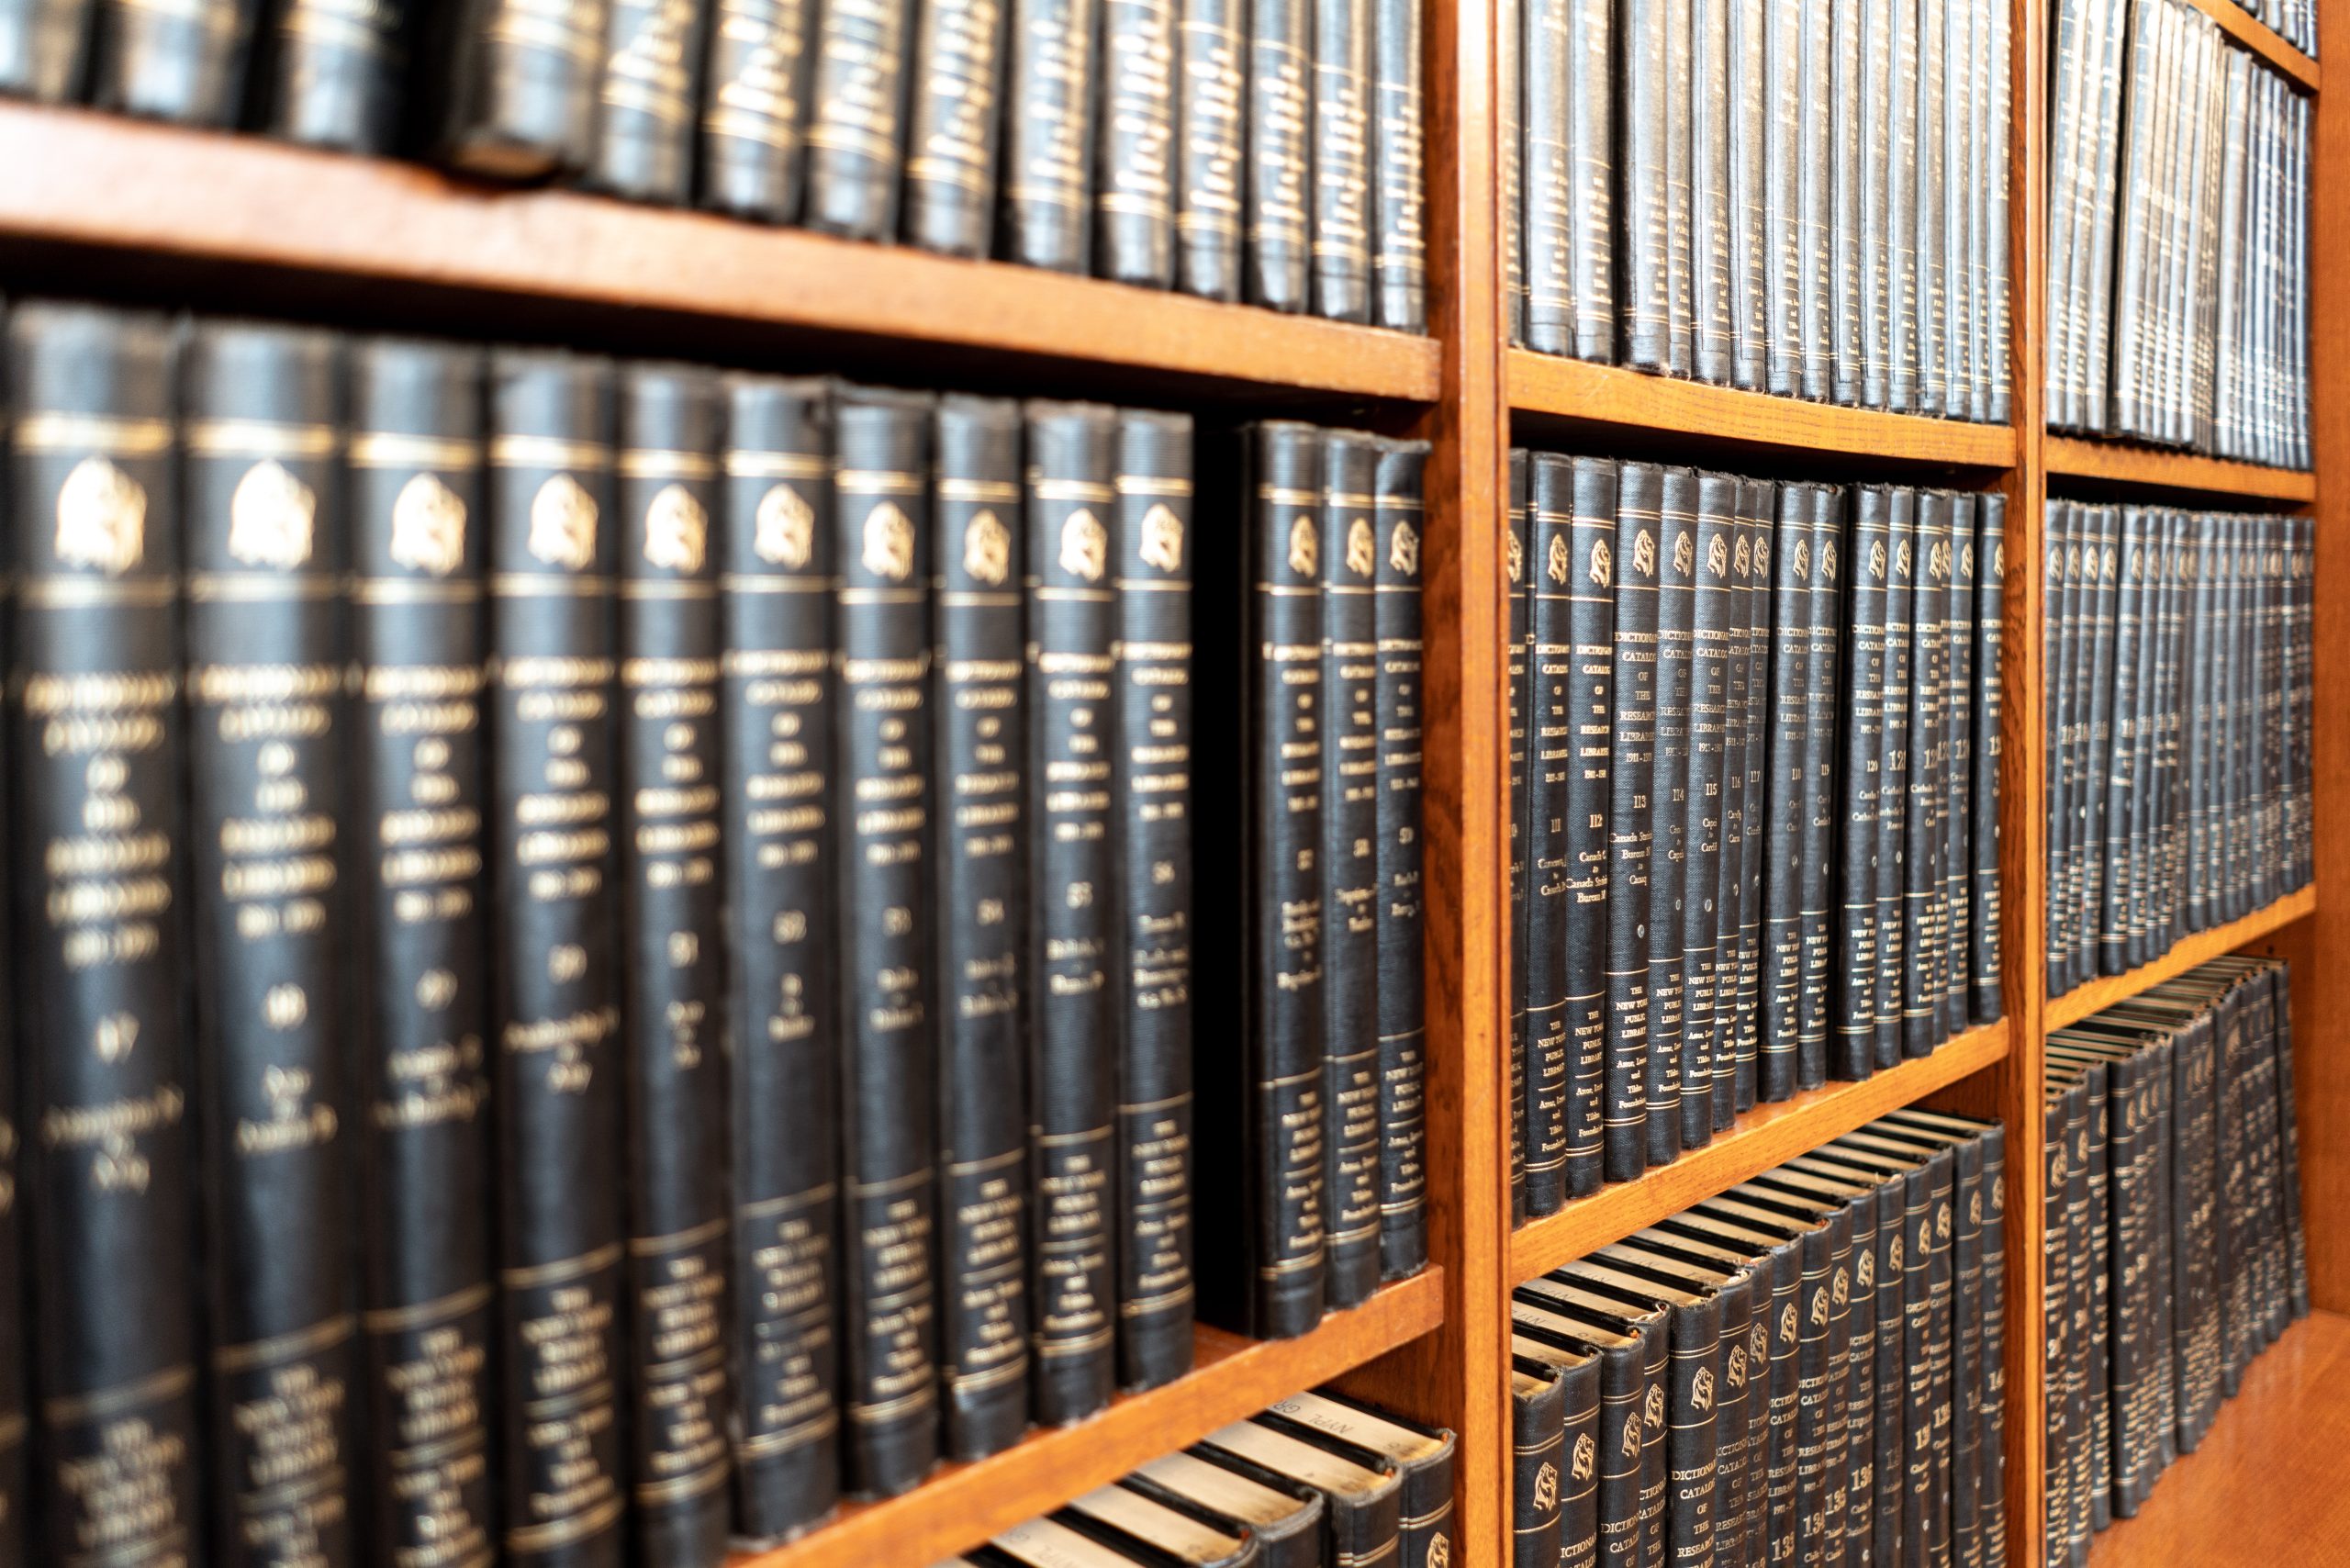 Books about law on bookshelves